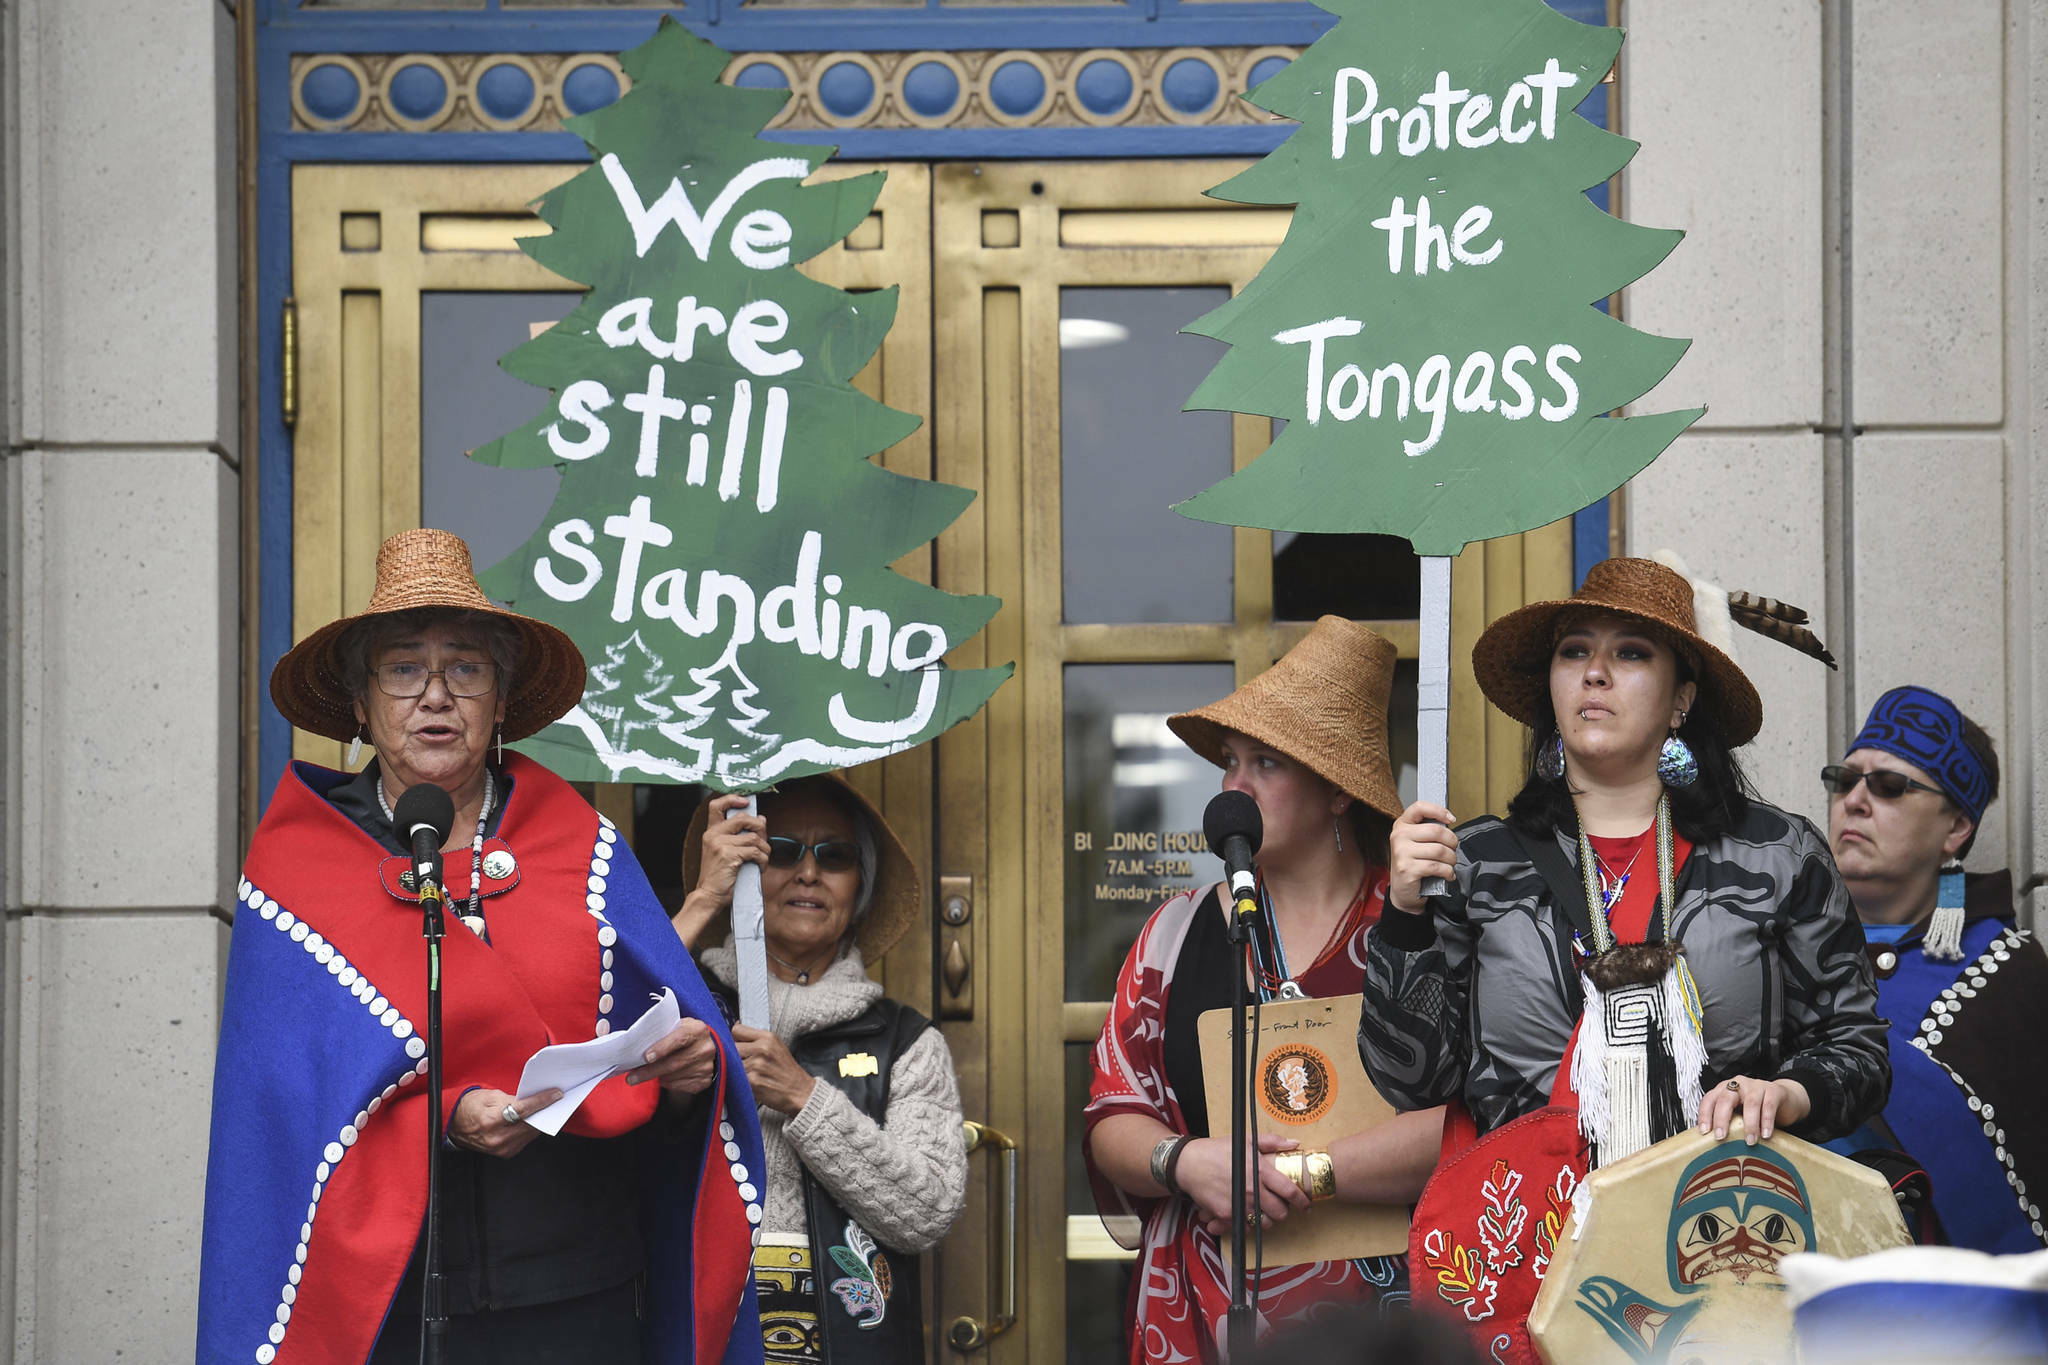 Wanda Culp (left) speaks during a rally at the Alaska State Capitol on Saturday, June 22, 2019. (Michael Penn / Juneau Empire file photo)